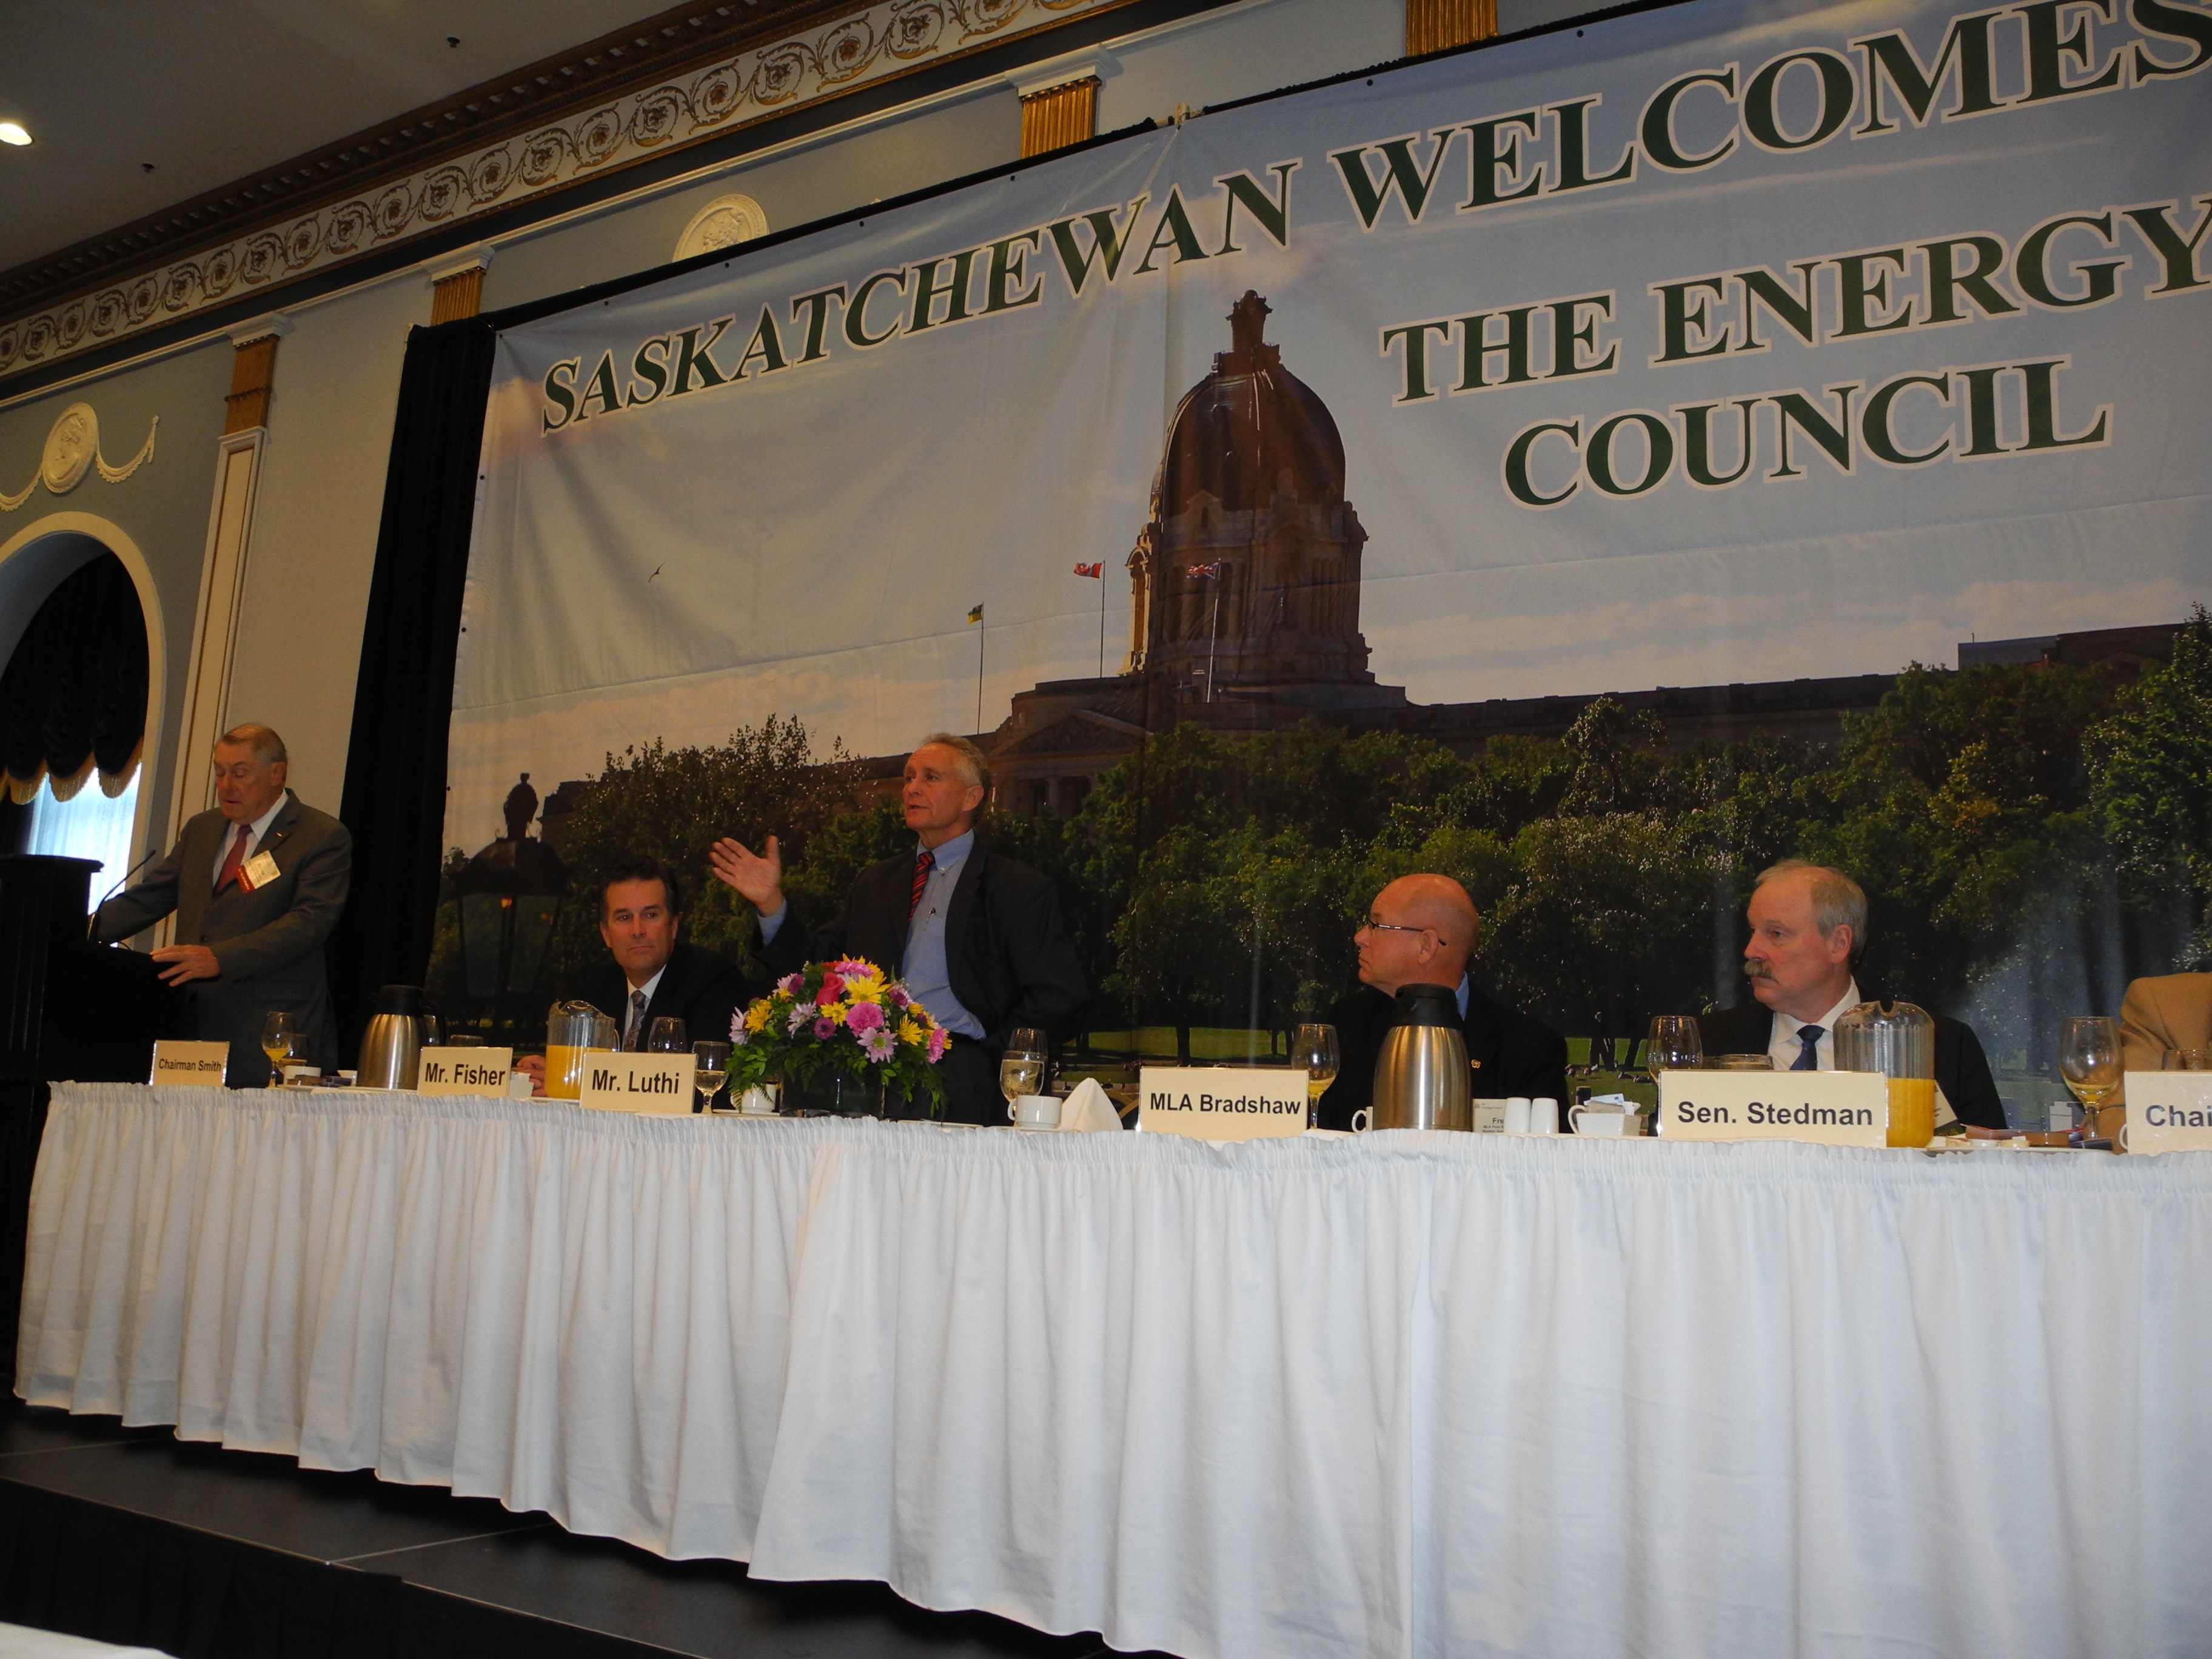 Senator Stedman and other panelists attending the Energy Council meeting